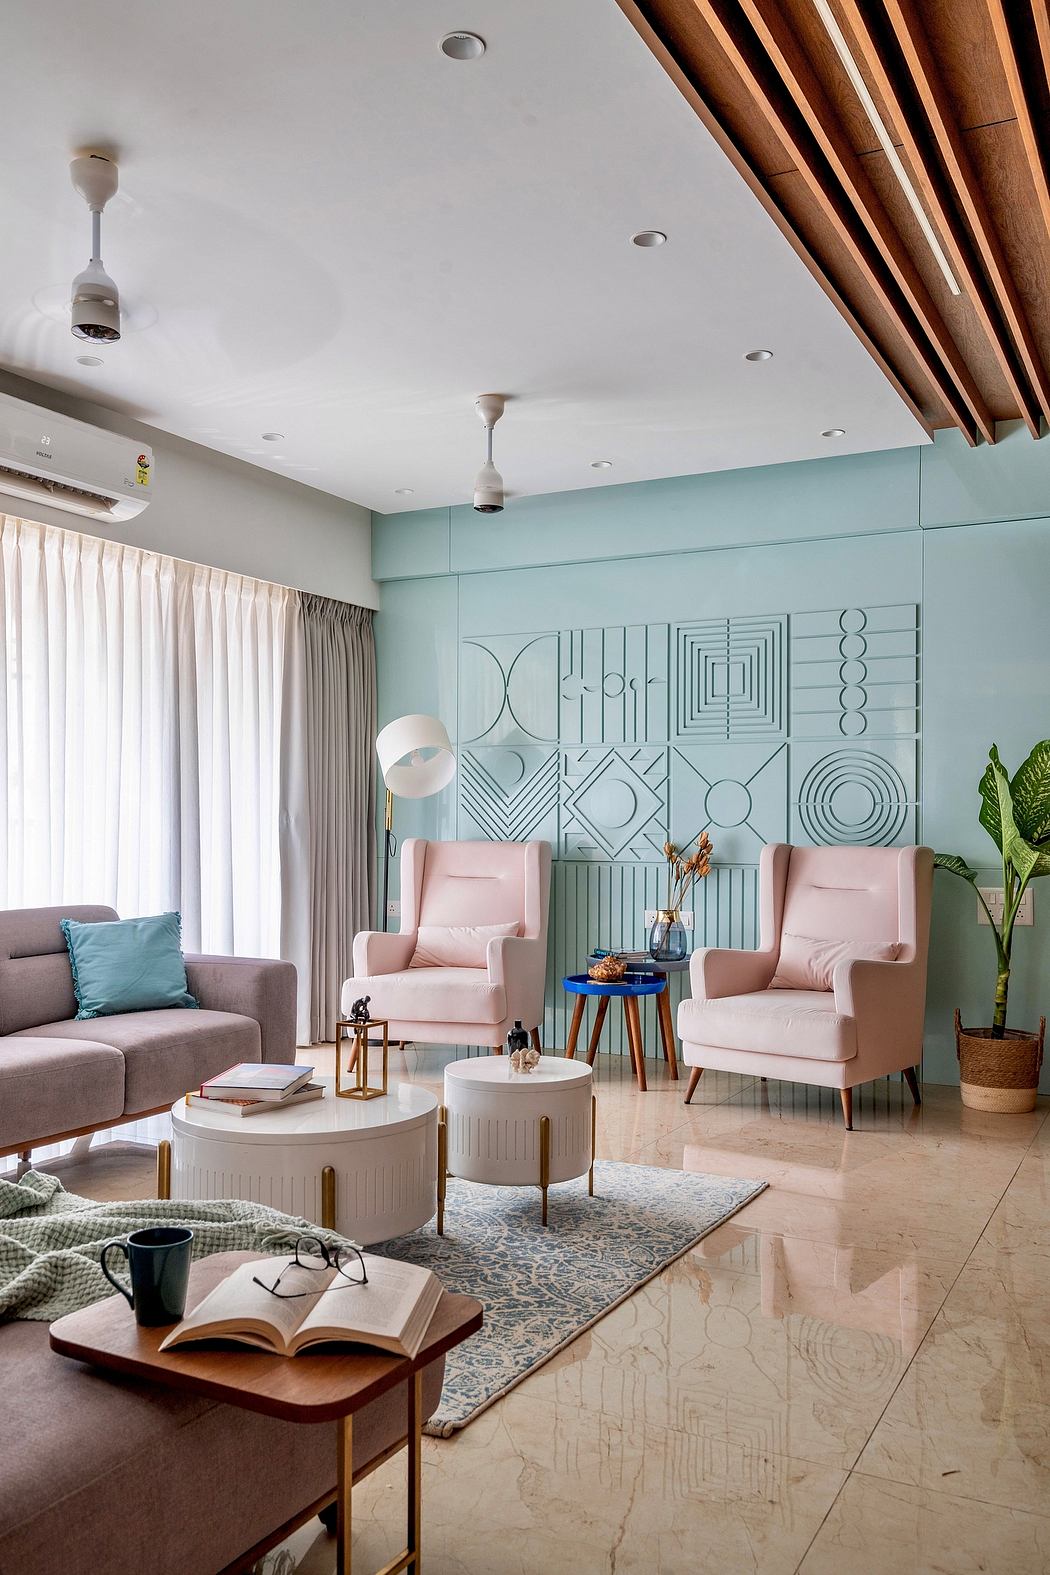 Elegant living room with geometric wall art, soft pink chairs, and wooden ceiling